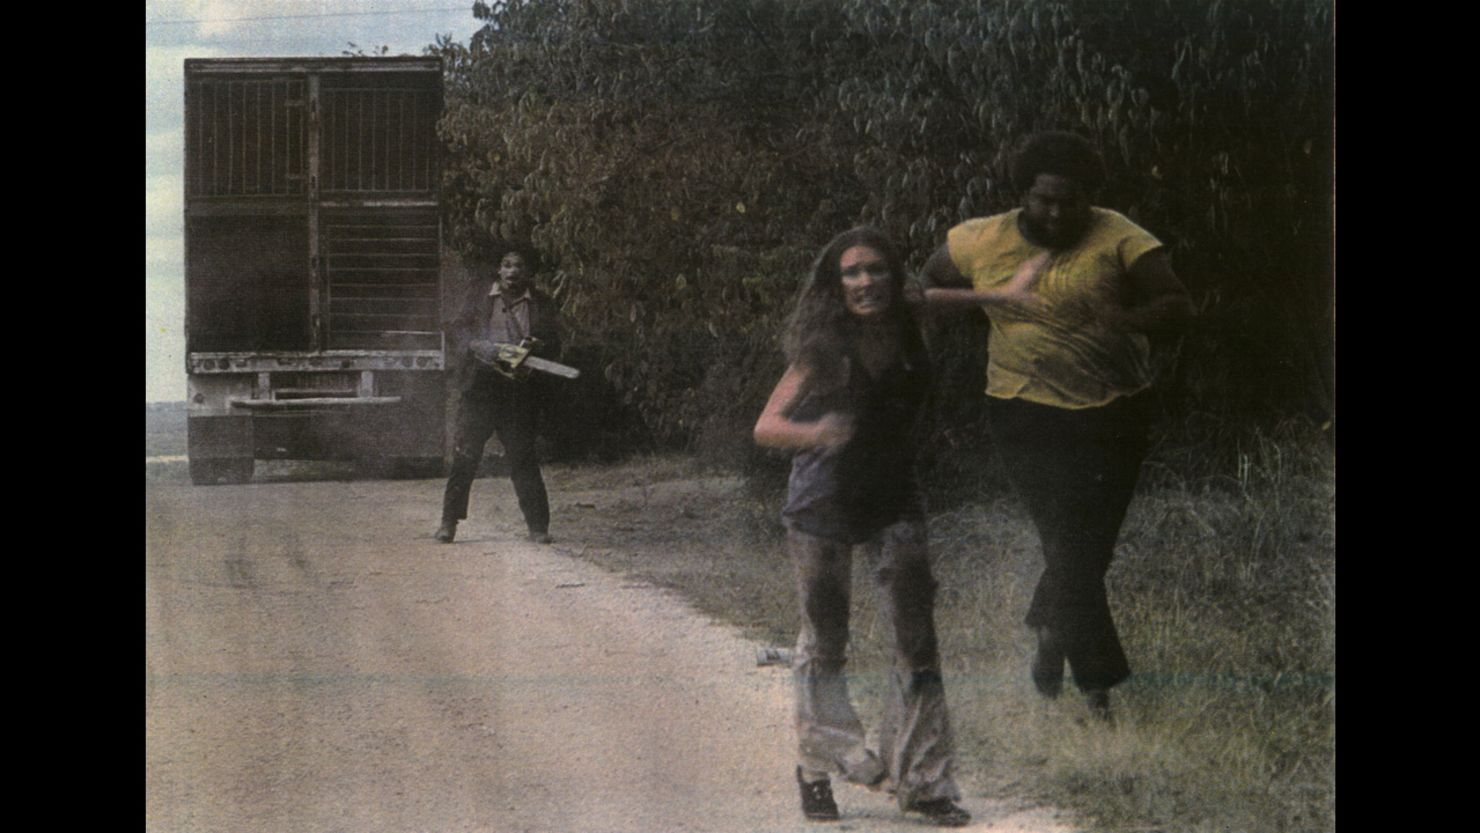  Marilyn Burns (center) runs from "Leatherface" in 'The Texas Chainsaw Massacre' (1974).